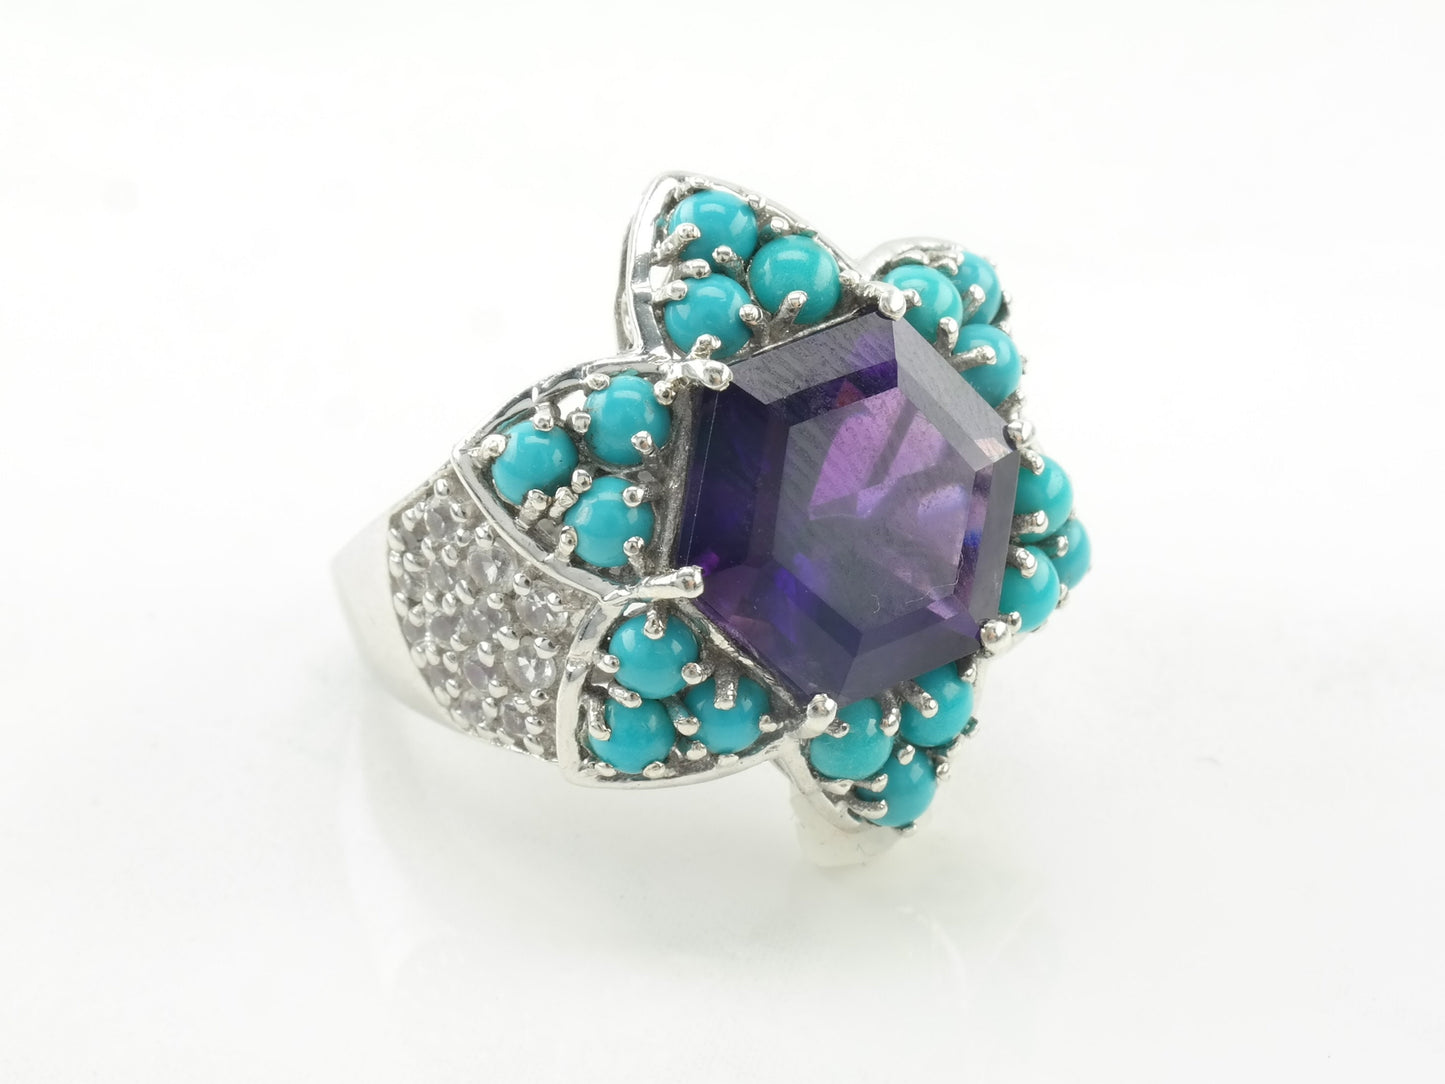 Vintage Cocktail Ring Amethyst Turquoise Star Sterling Silver Size 8 1/4